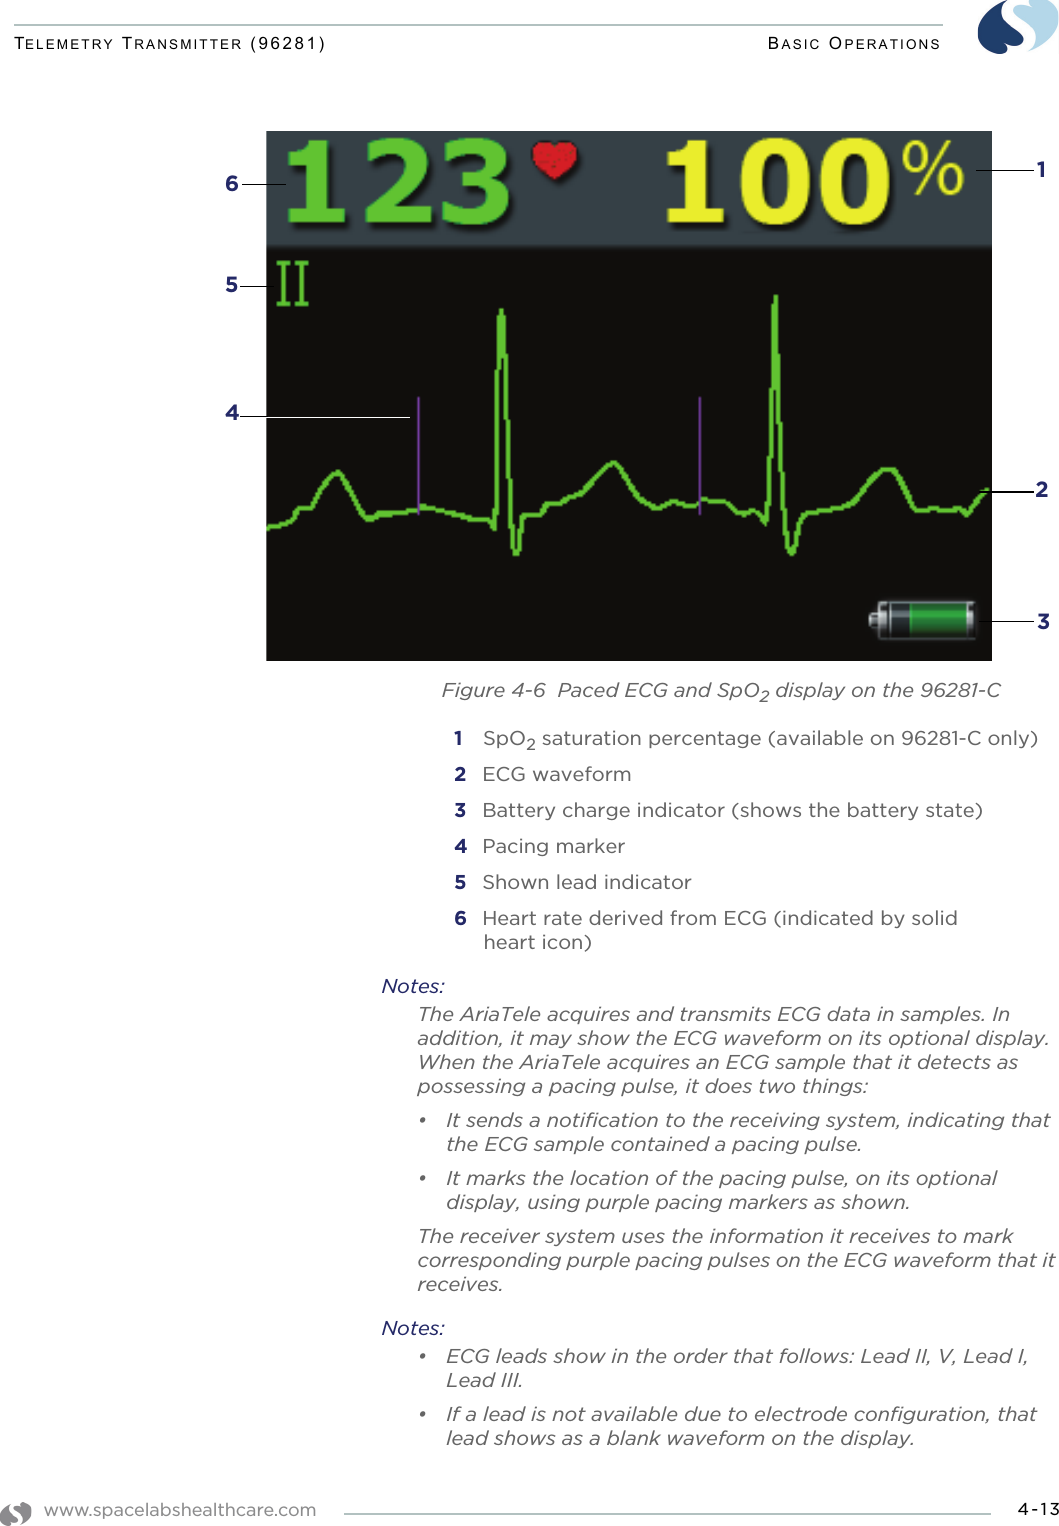 www.spacelabshealthcare.com 4-13TELEMETRY TRANSMITTER (96281) BASIC OPERATIONSFigure 4-6  Paced ECG and SpO2 display on the 96281-C1  SpO2 saturation percentage (available on 96281-C only)2 ECG waveform3 Battery charge indicator (shows the battery state)4 Pacing marker5 Shown lead indicator6 Heart rate derived from ECG (indicated by solid heart icon)Notes: The AriaTele acquires and transmits ECG data in samples. In addition, it may show the ECG waveform on its optional display. When the AriaTele acquires an ECG sample that it detects as possessing a pacing pulse, it does two things:• It sends a notification to the receiving system, indicating that the ECG sample contained a pacing pulse.• It marks the location of the pacing pulse, on its optional display, using purple pacing markers as shown.The receiver system uses the information it receives to mark corresponding purple pacing pulses on the ECG waveform that it receives.Notes:• ECG leads show in the order that follows: Lead II, V, Lead I, Lead III. • If a lead is not available due to electrode configuration, that lead shows as a blank waveform on the display.   1235 64